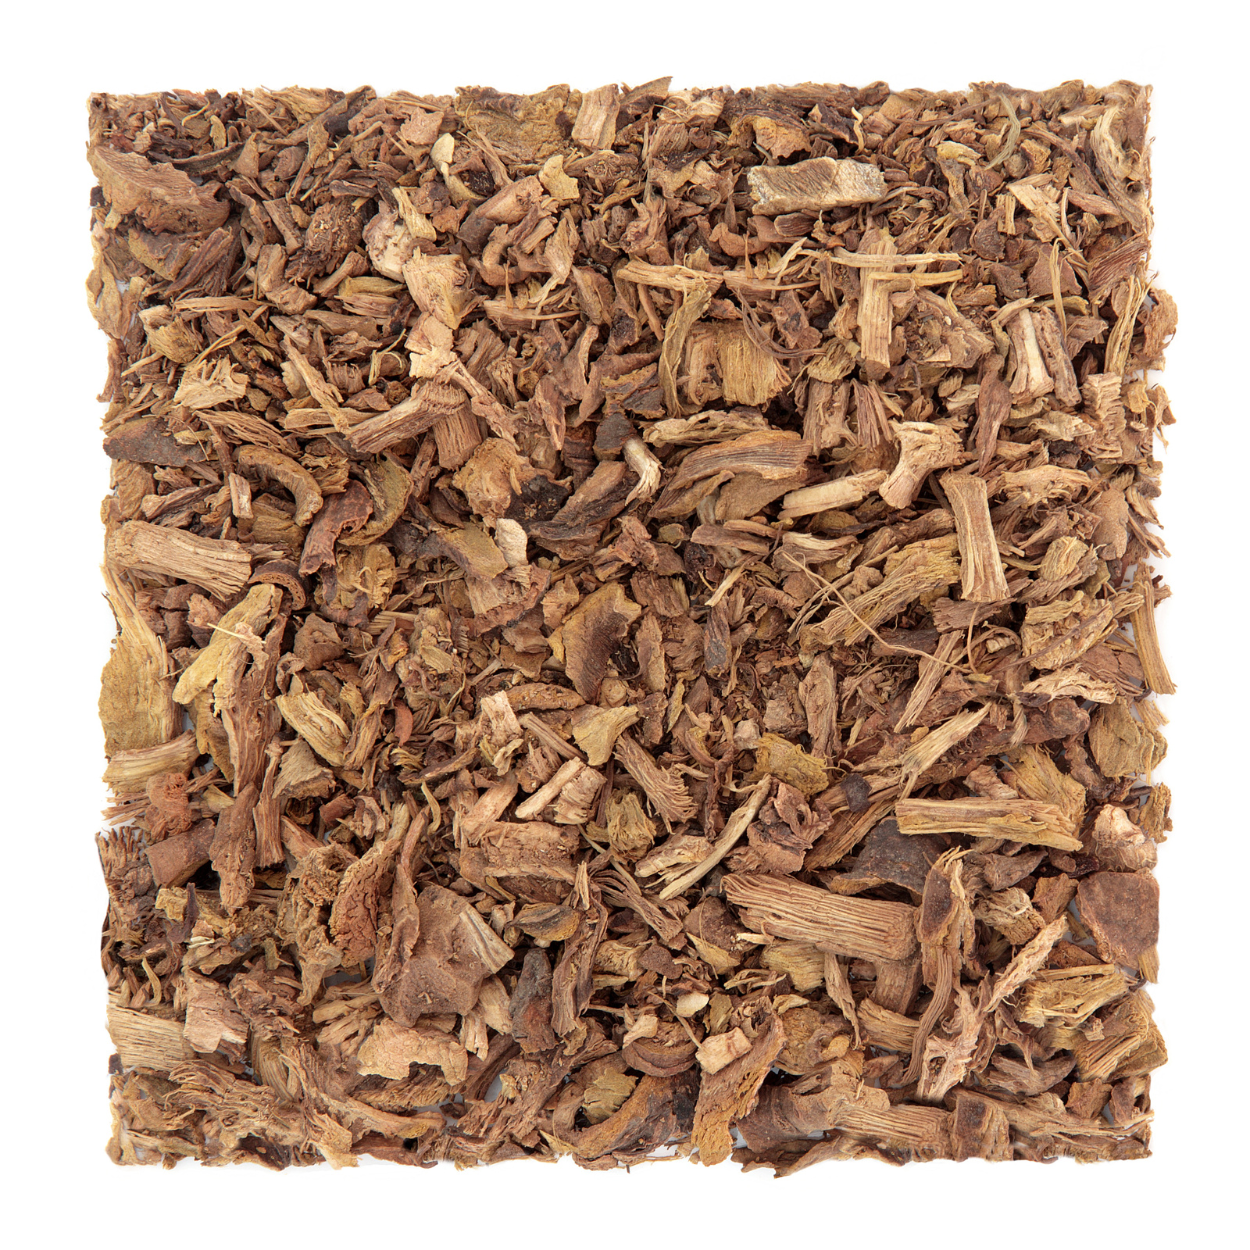 Witchy Pooh's Yellow Dock Root For Blood Purification, Smudging For Ritual to Release Past Traumas-13